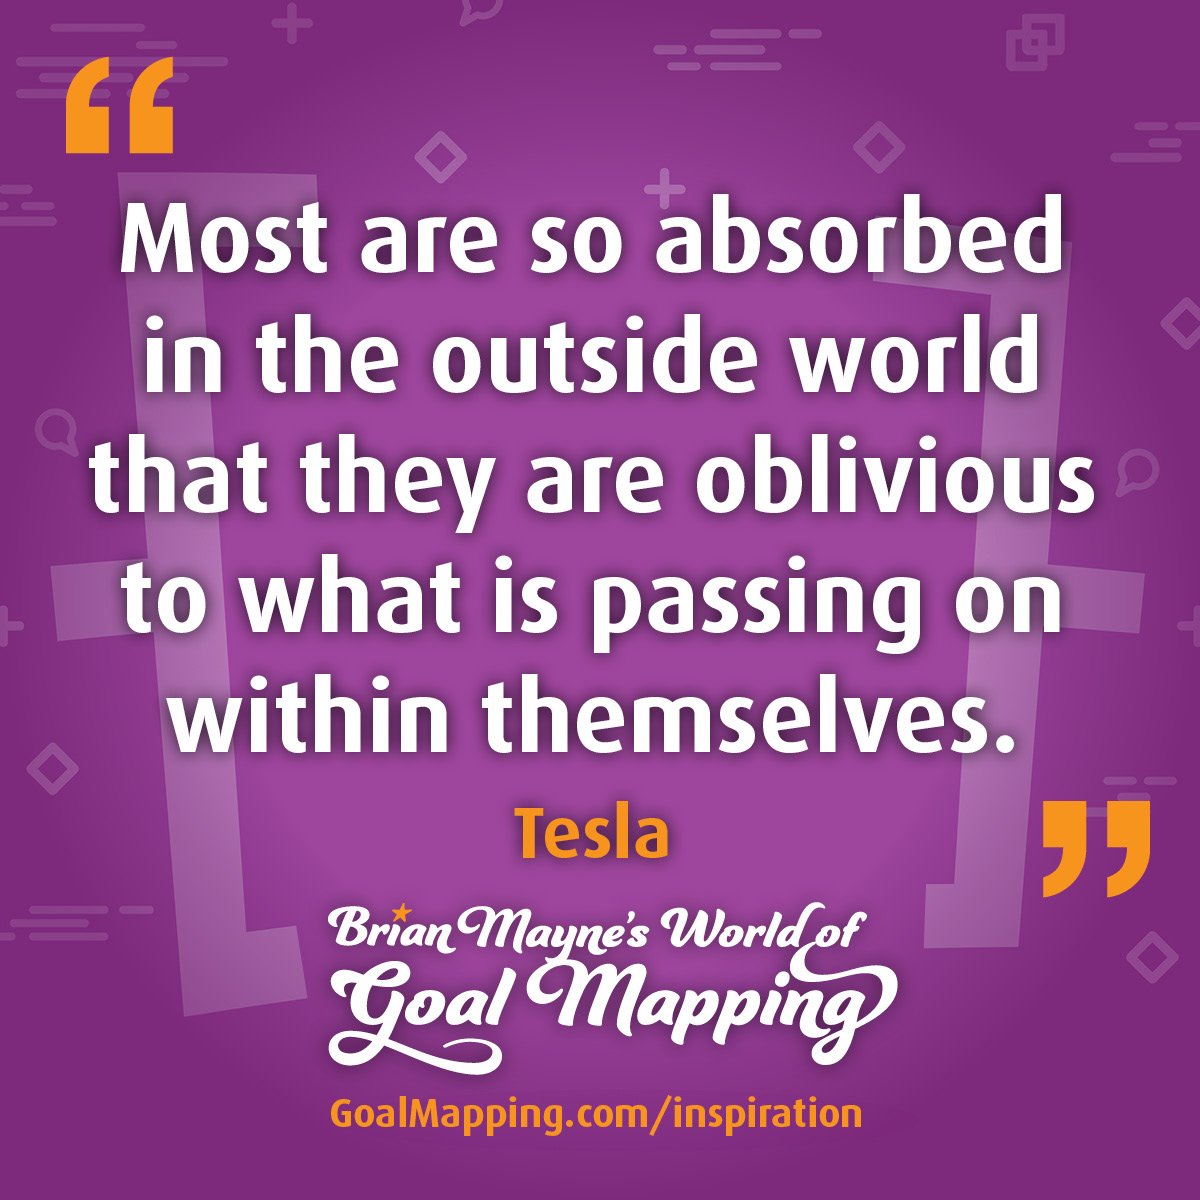 "Most are so absorbed in the outside world that they are oblivious to what is passing on within themselves." Tesla